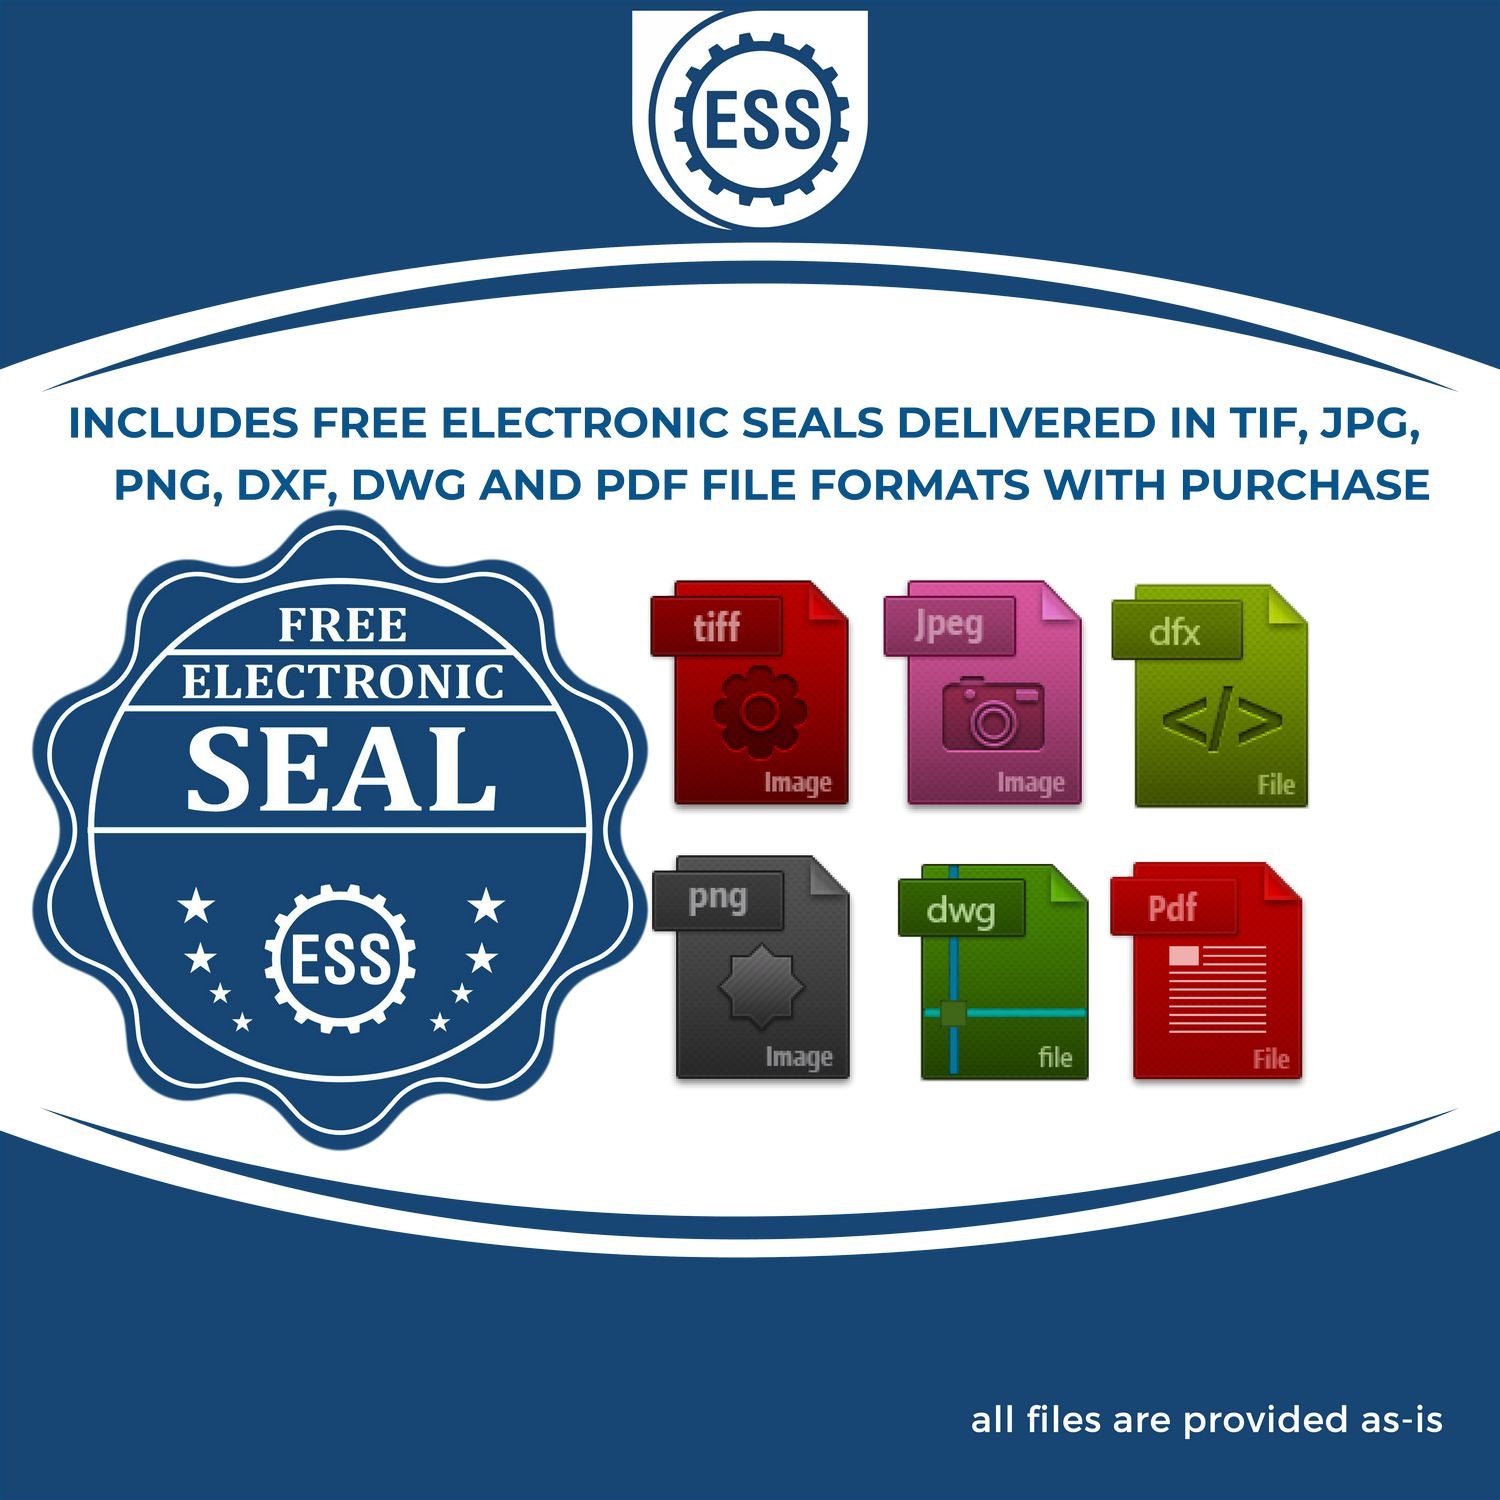 An infographic for the free electronic seal for the Slim Pre-Inked South Dakota Landscape Architect Seal Stamp illustrating the different file type icons such as DXF, DWG, TIF, JPG and PNG.